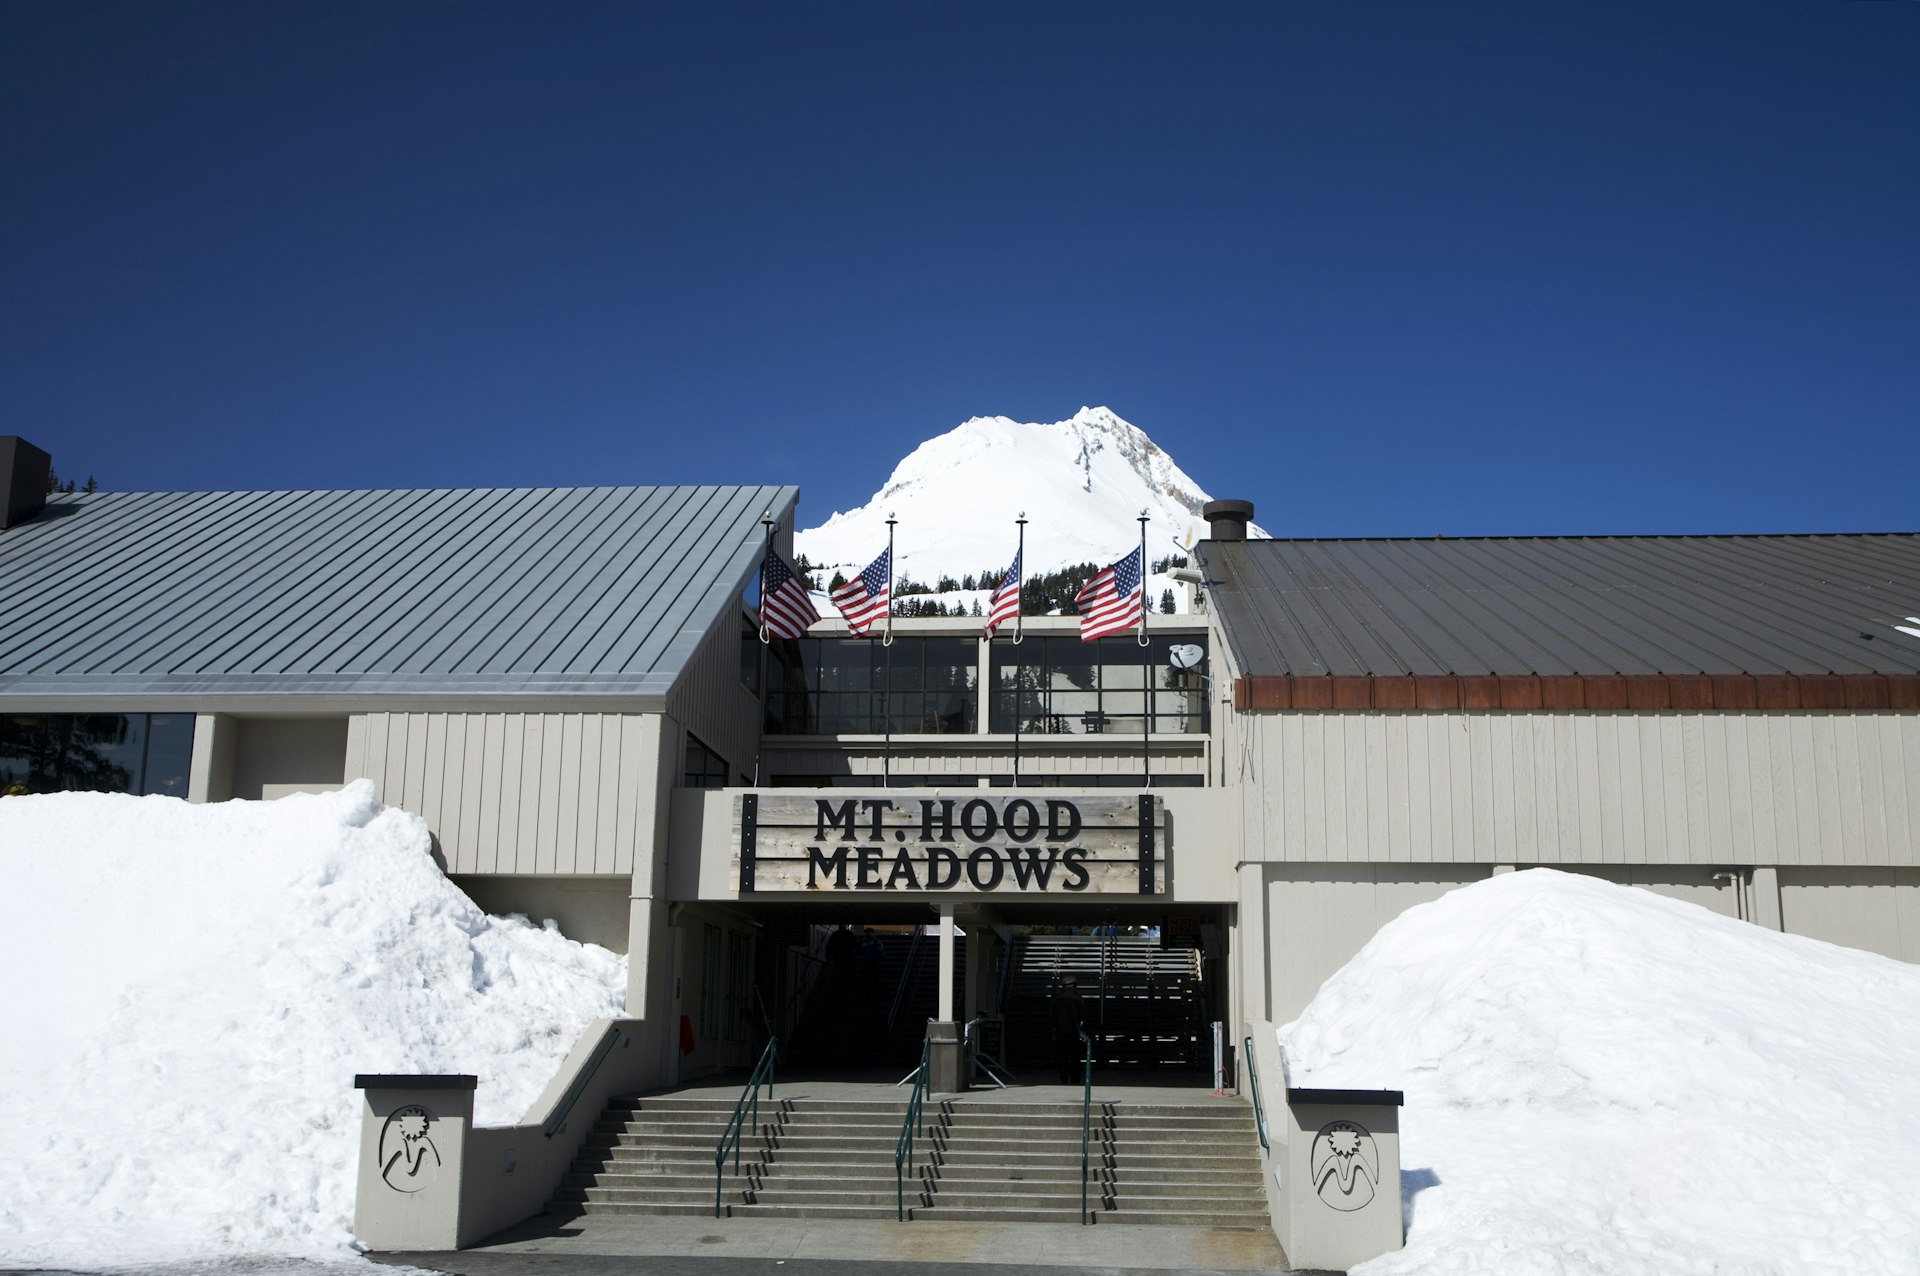 The snowy peak of Mt. Hood is framed by the entrance to Mt. Hood Meadows ski resort, which is made up of a large serif-font sign with the name of the lodge balanced over the front doors between two plain A-Frame wings of the building. Three American flags flutter over the signage.